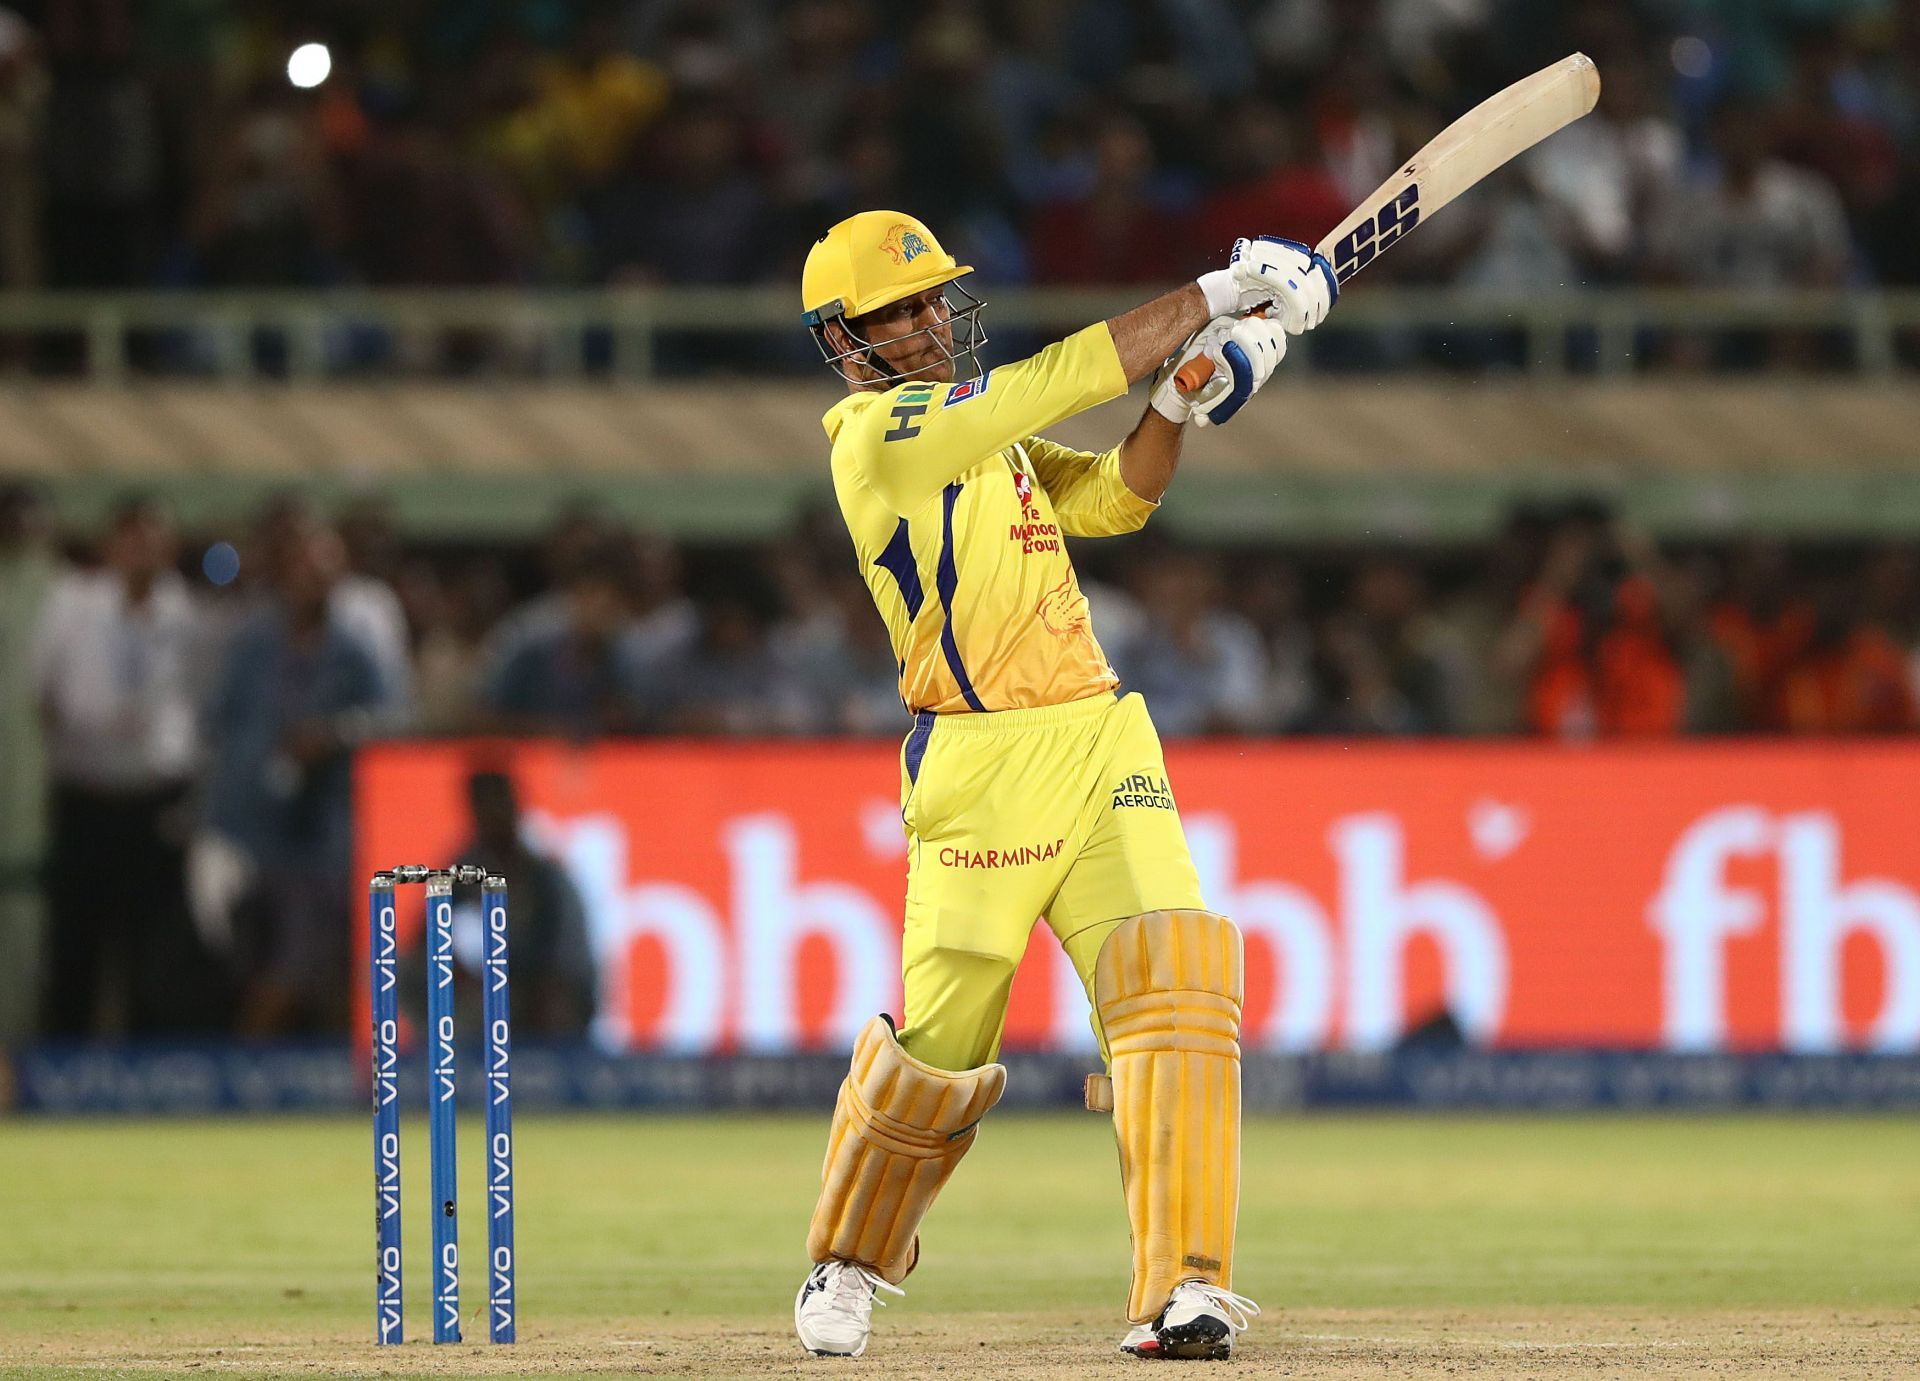 MS Dhoni has been the captain of the Chennai Super Kings since the first season